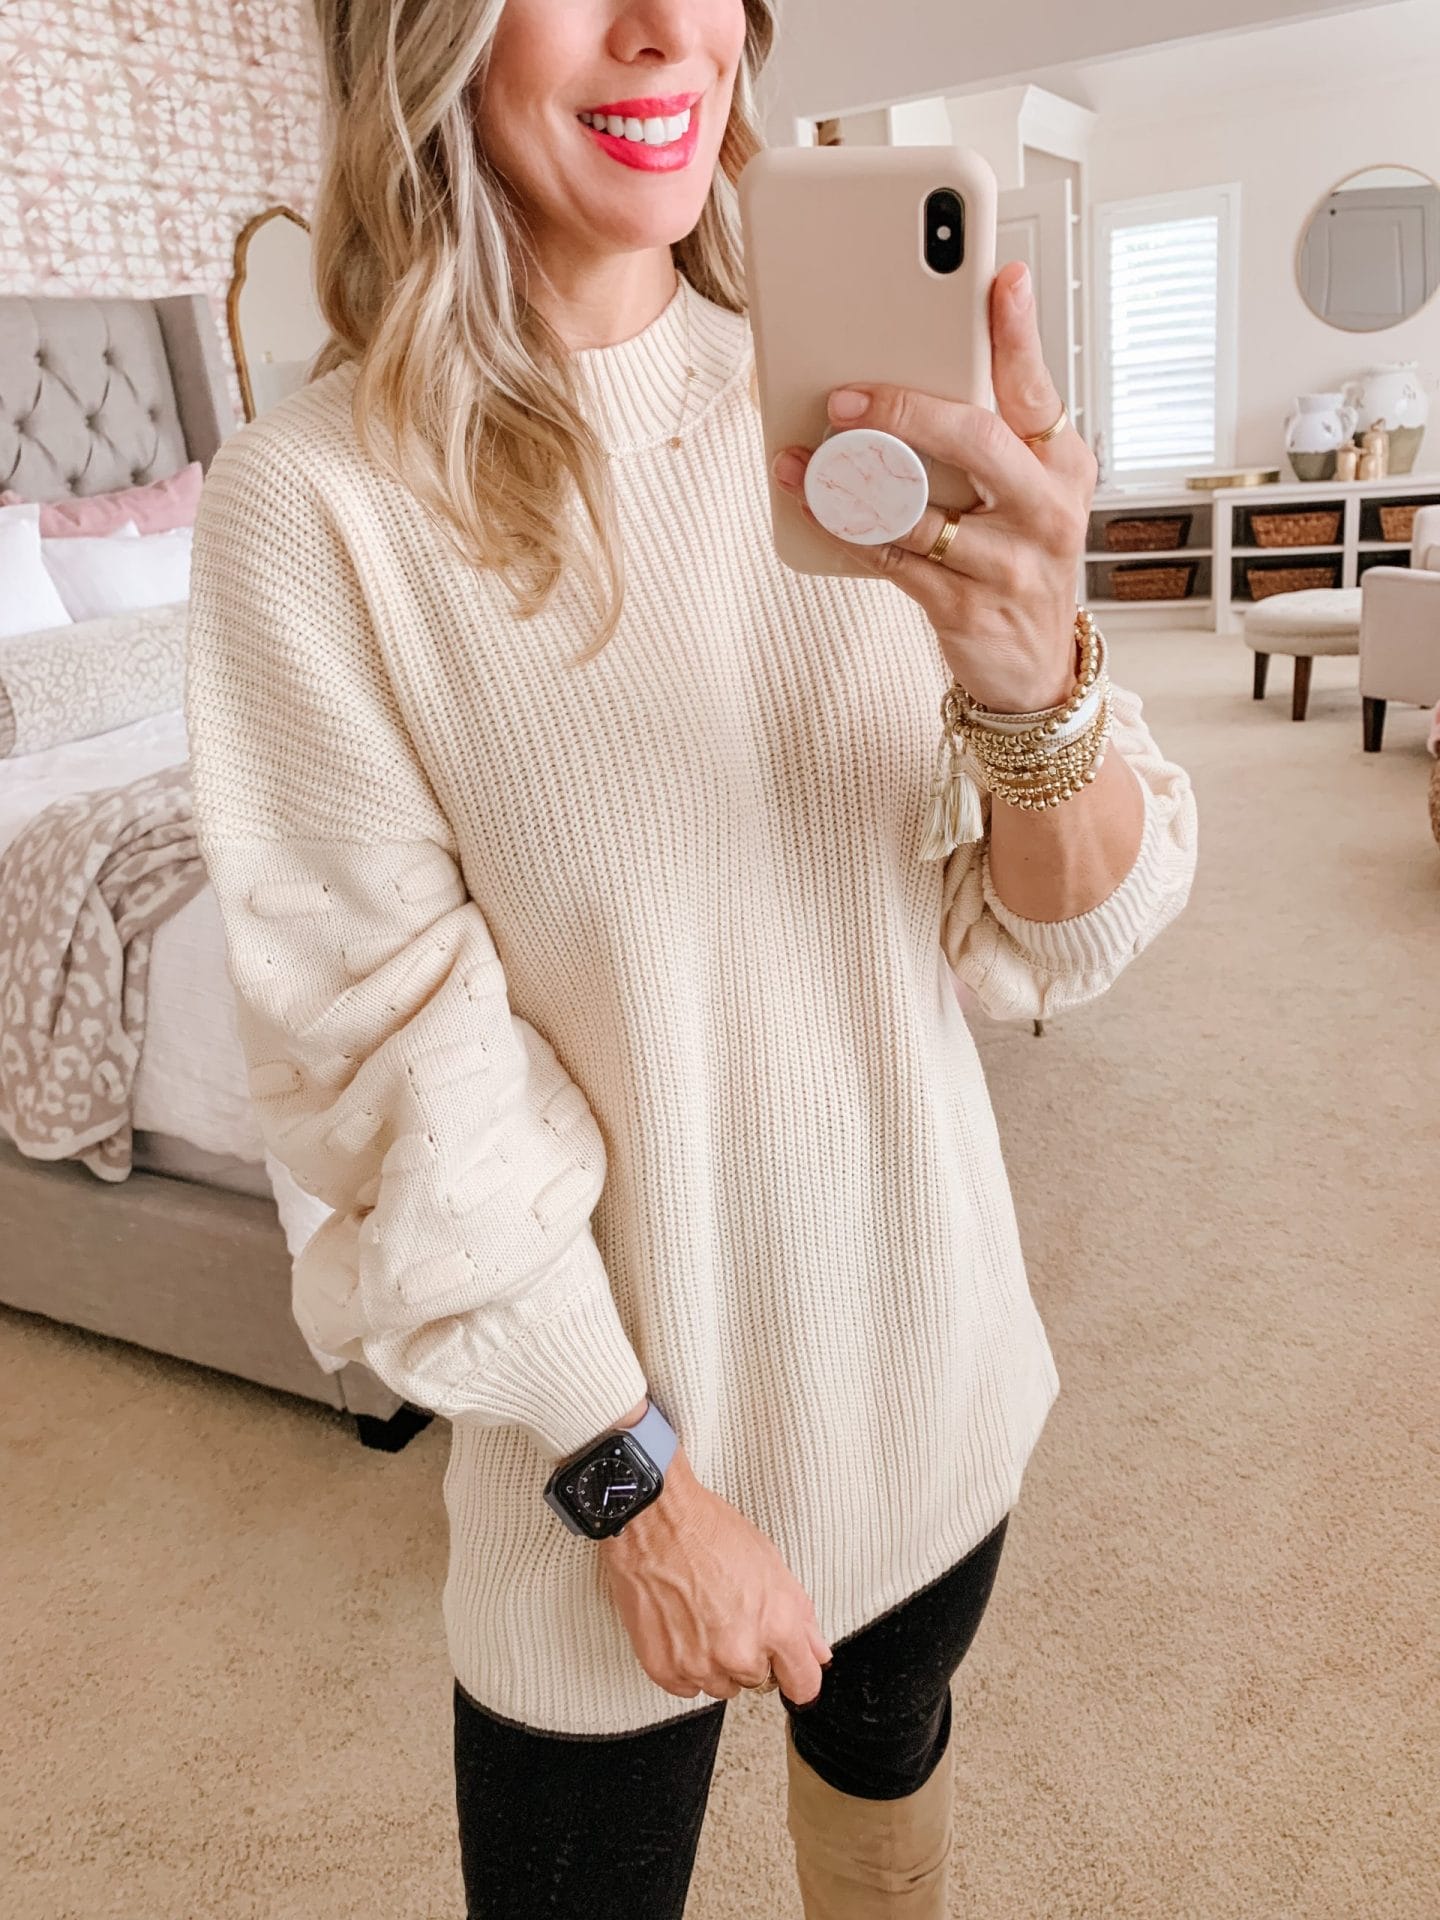 Amazon Fashion Finds, Sweater, Jeans, Boots 